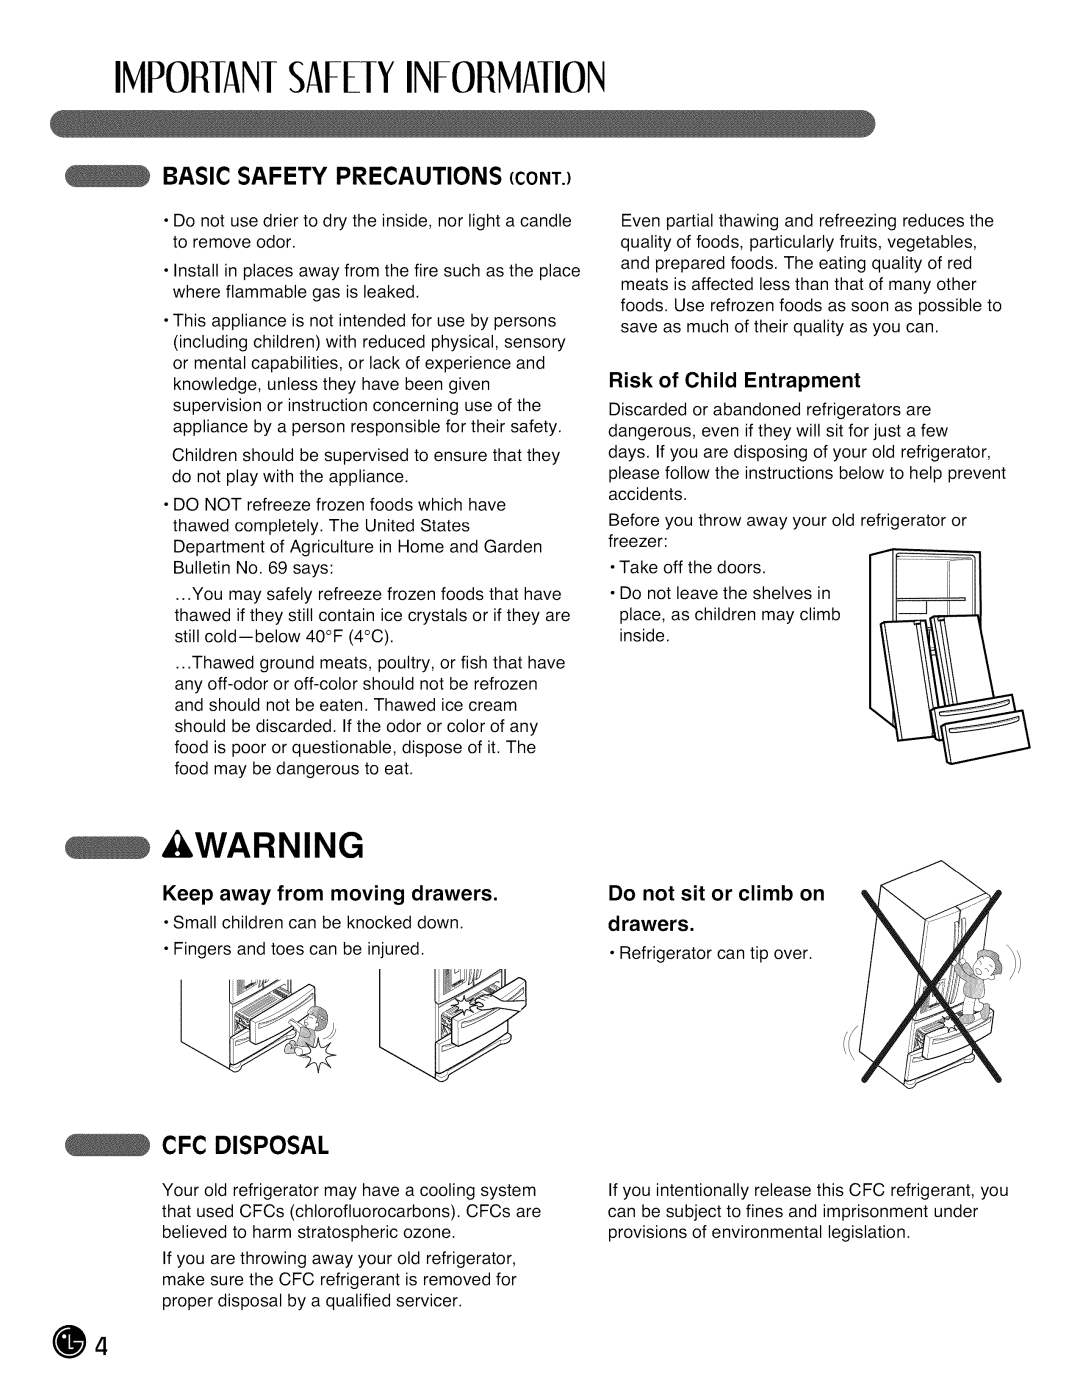 LG Electronics LMX28988 Imporian!Safelyinformation, Warning, Basic Safety Precautions Cont, Cfc Disposal, Keep, drawers 